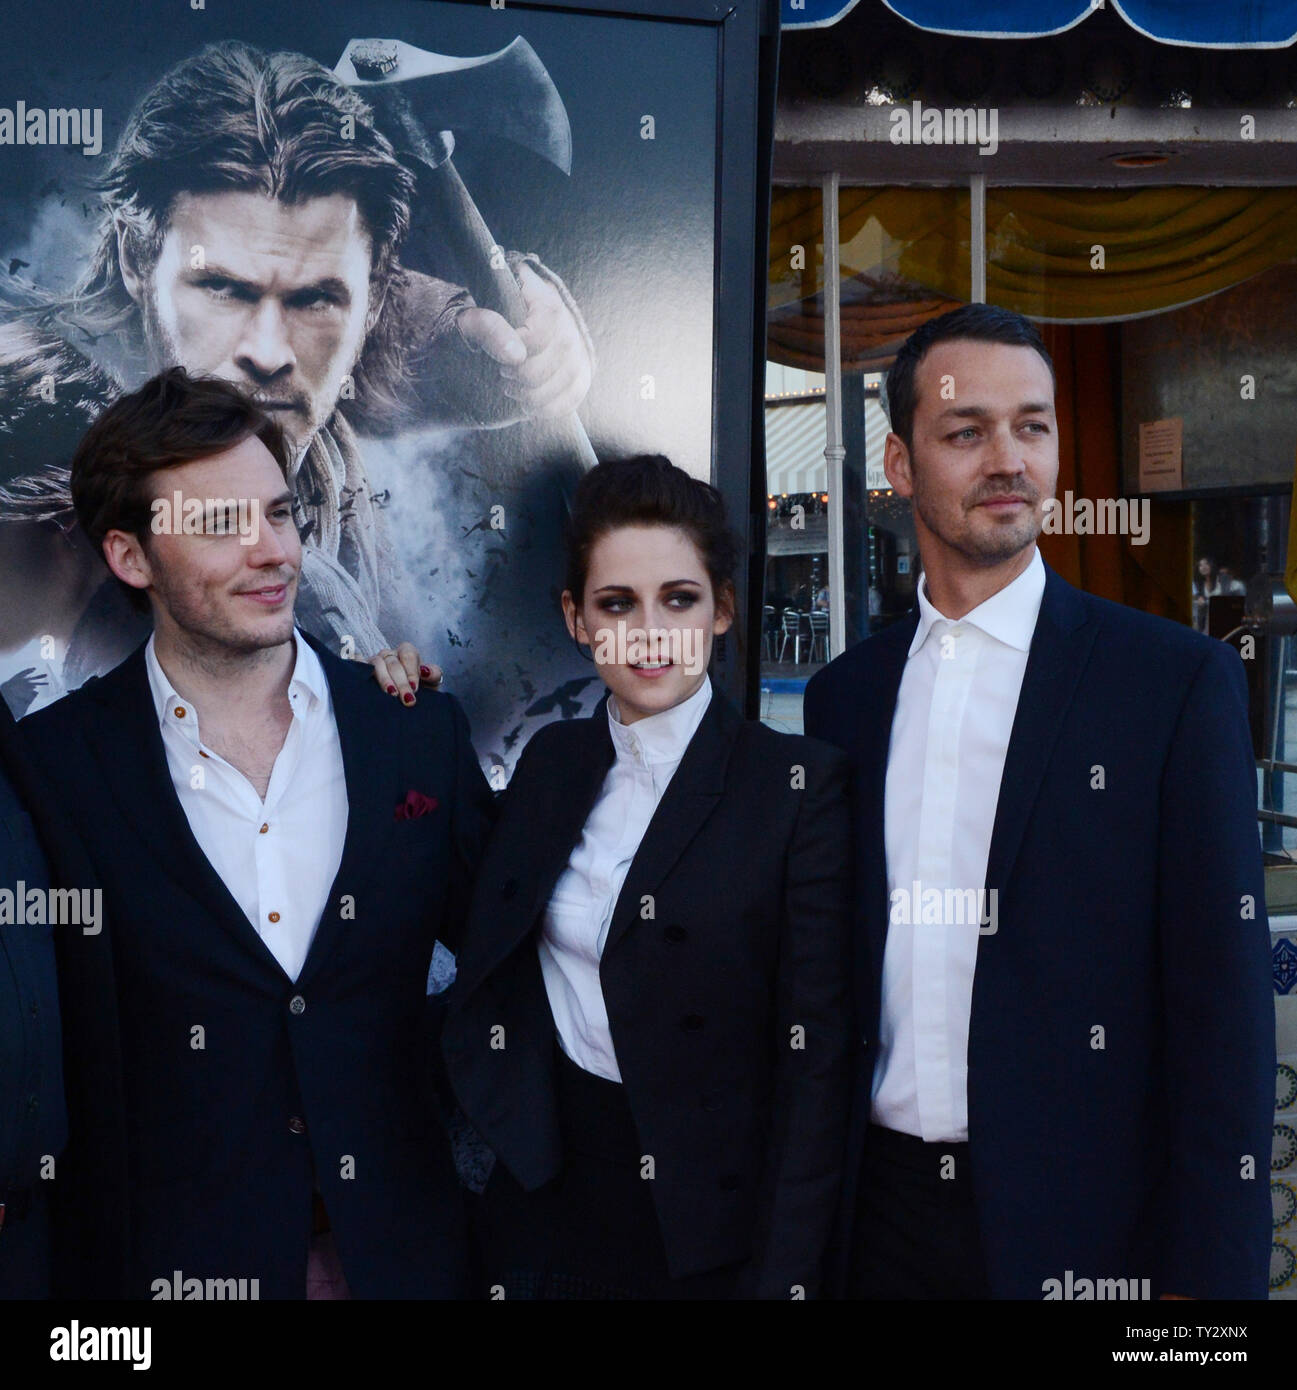 Director Rupert Sanders (R) attends a screening of his new motion picture fantasy 'Snow White and the Huntsman', with cast members Sam Caflin (L) and Kristen Stewart (C), at the Village Theatre in the Westwood section of Los Angeles on May 29, 2012.  UPI/Jim Ruymen Stock Photo